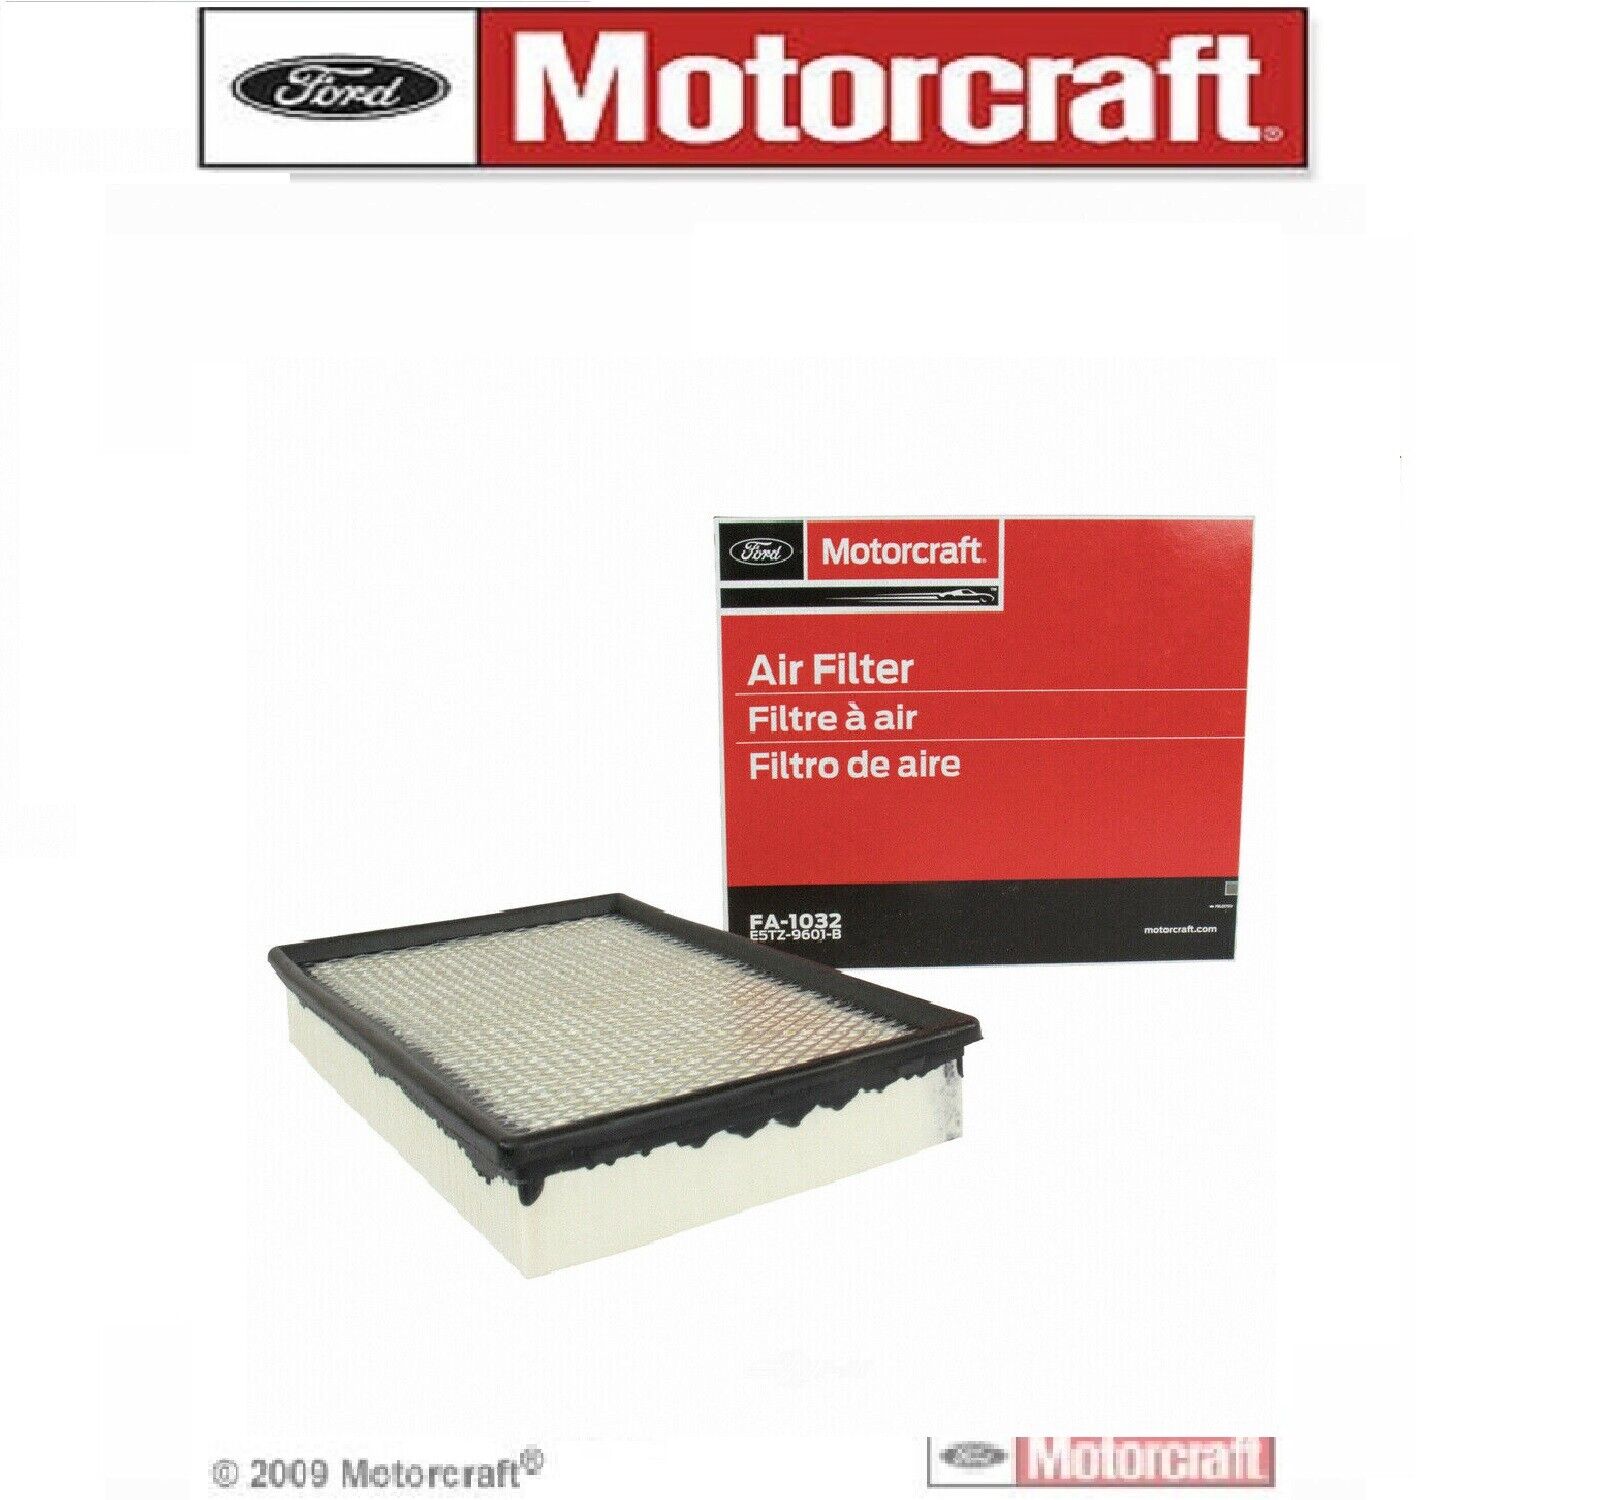 Ford Motorcraft Air Filter For TOWN CAR 1986-2011